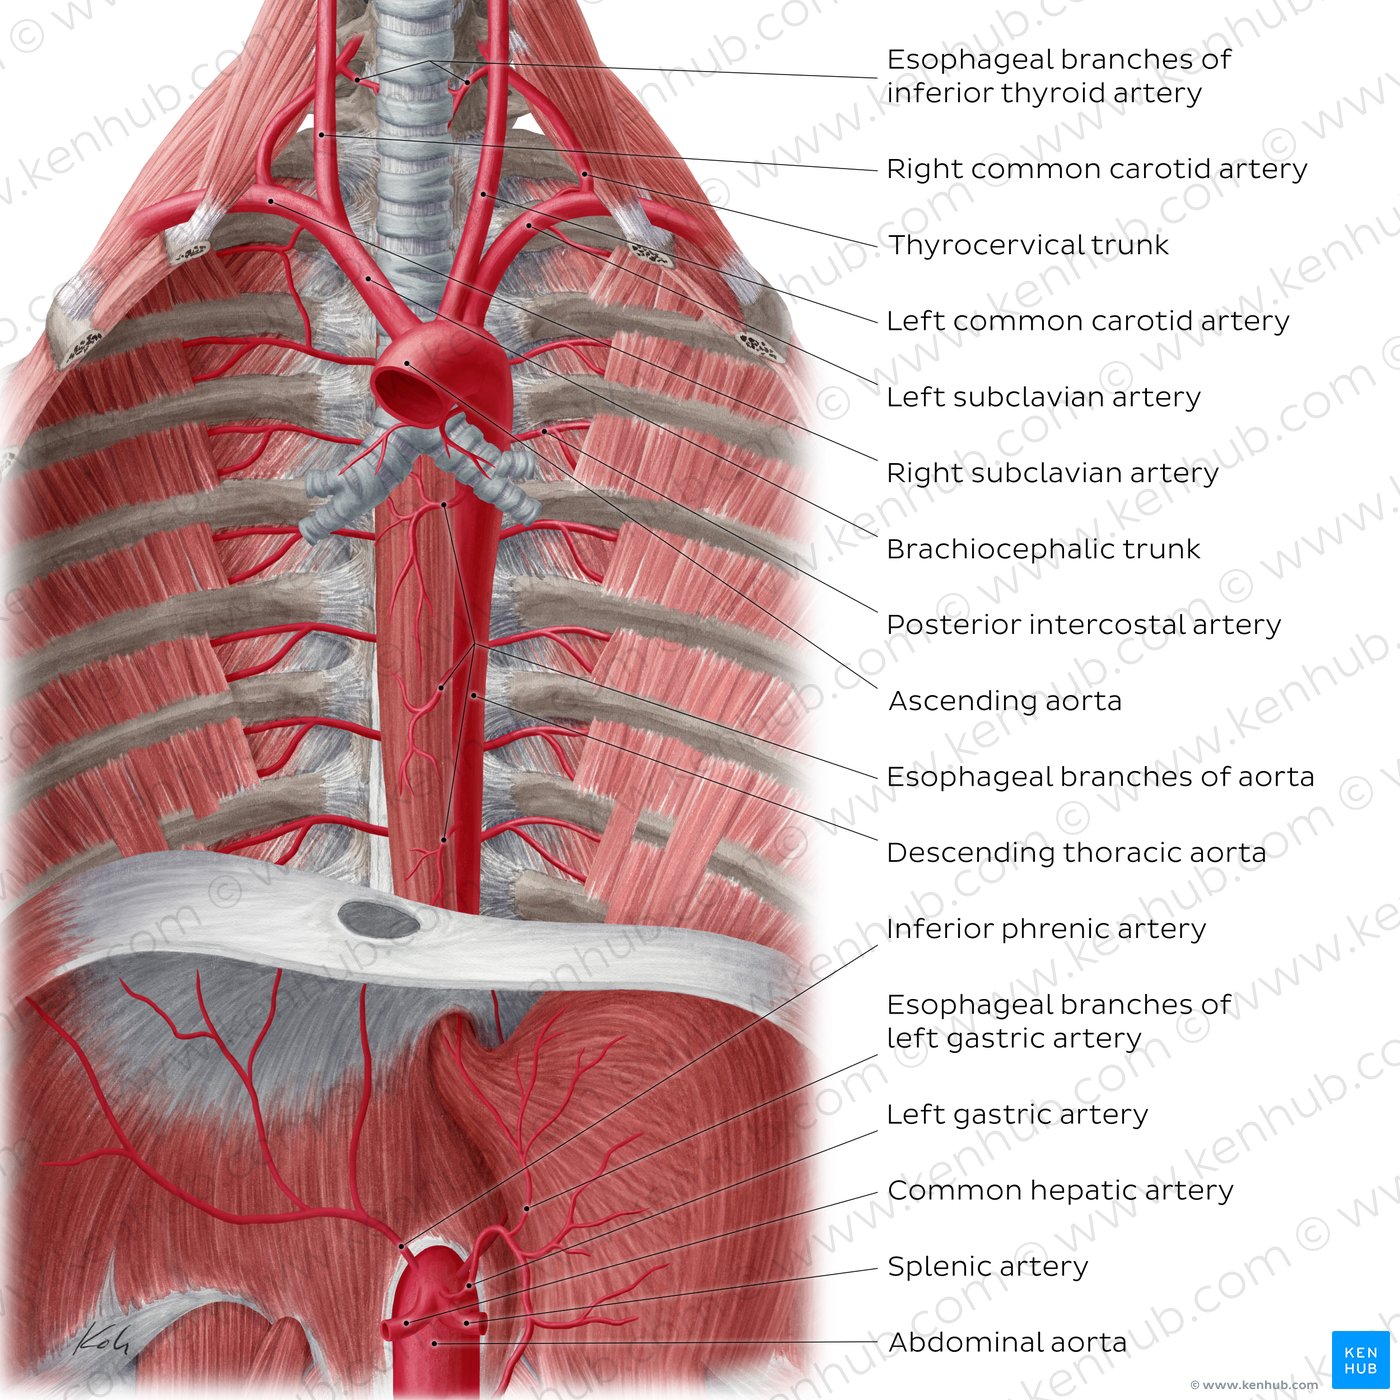 Arteries of the esophagus (anterior view)